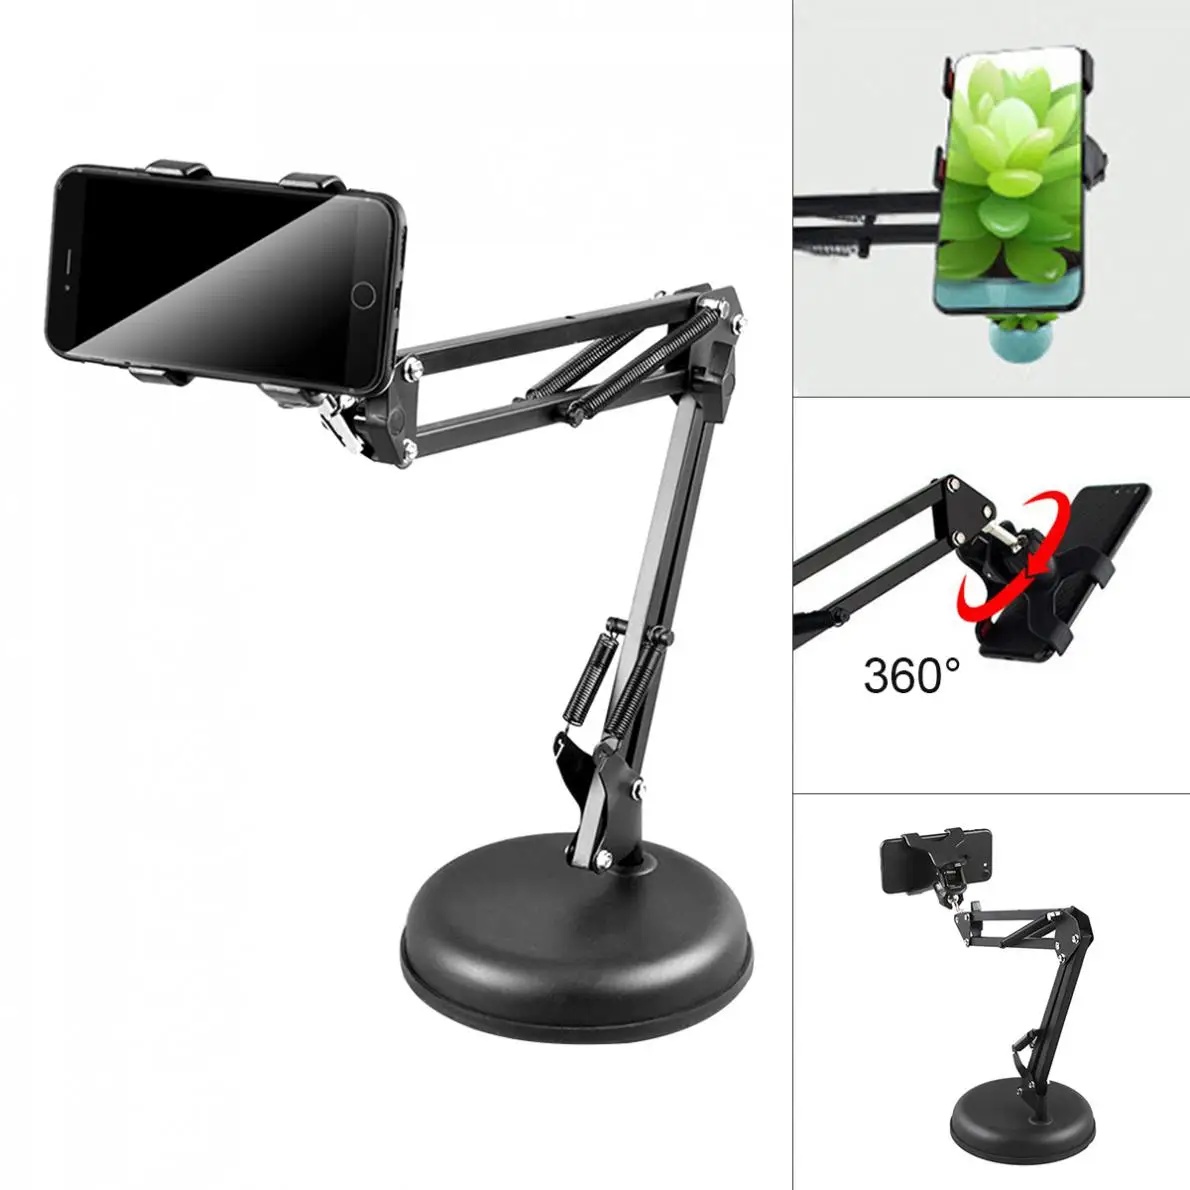 

Mobile Phone Holder 360 Rotating Flexible Arms Phone Clamp Clips Smartphone Desktop Metal Bracket Phone Stand Clamp Support